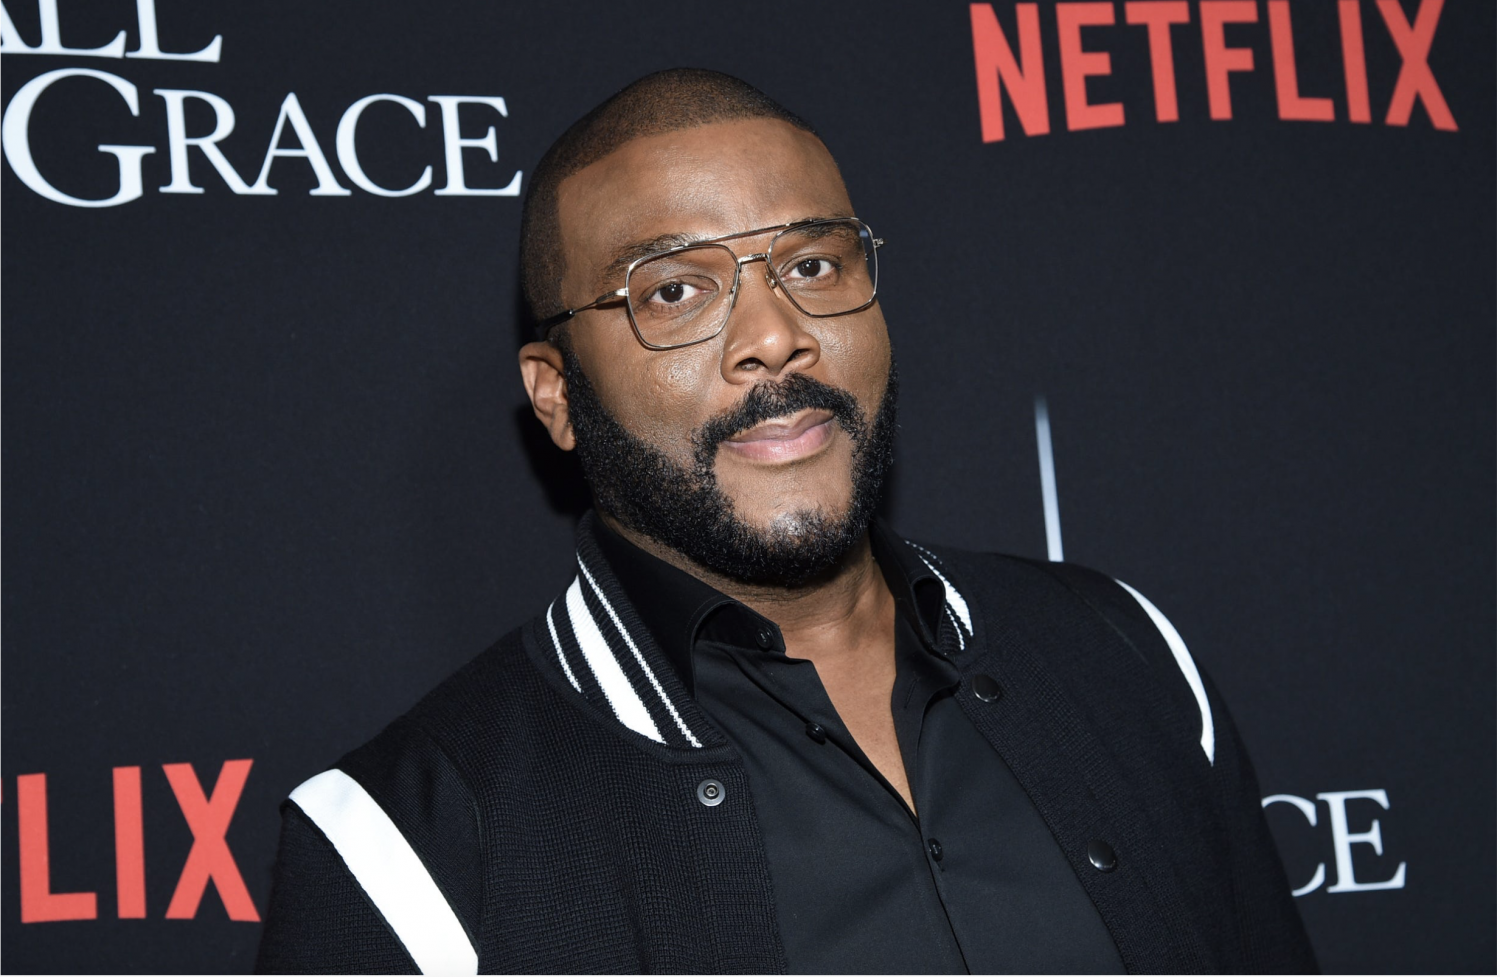 The writer-director-actor Tyler Perry told Linkedln's CEO how you could be hired for his production company. Associated Press